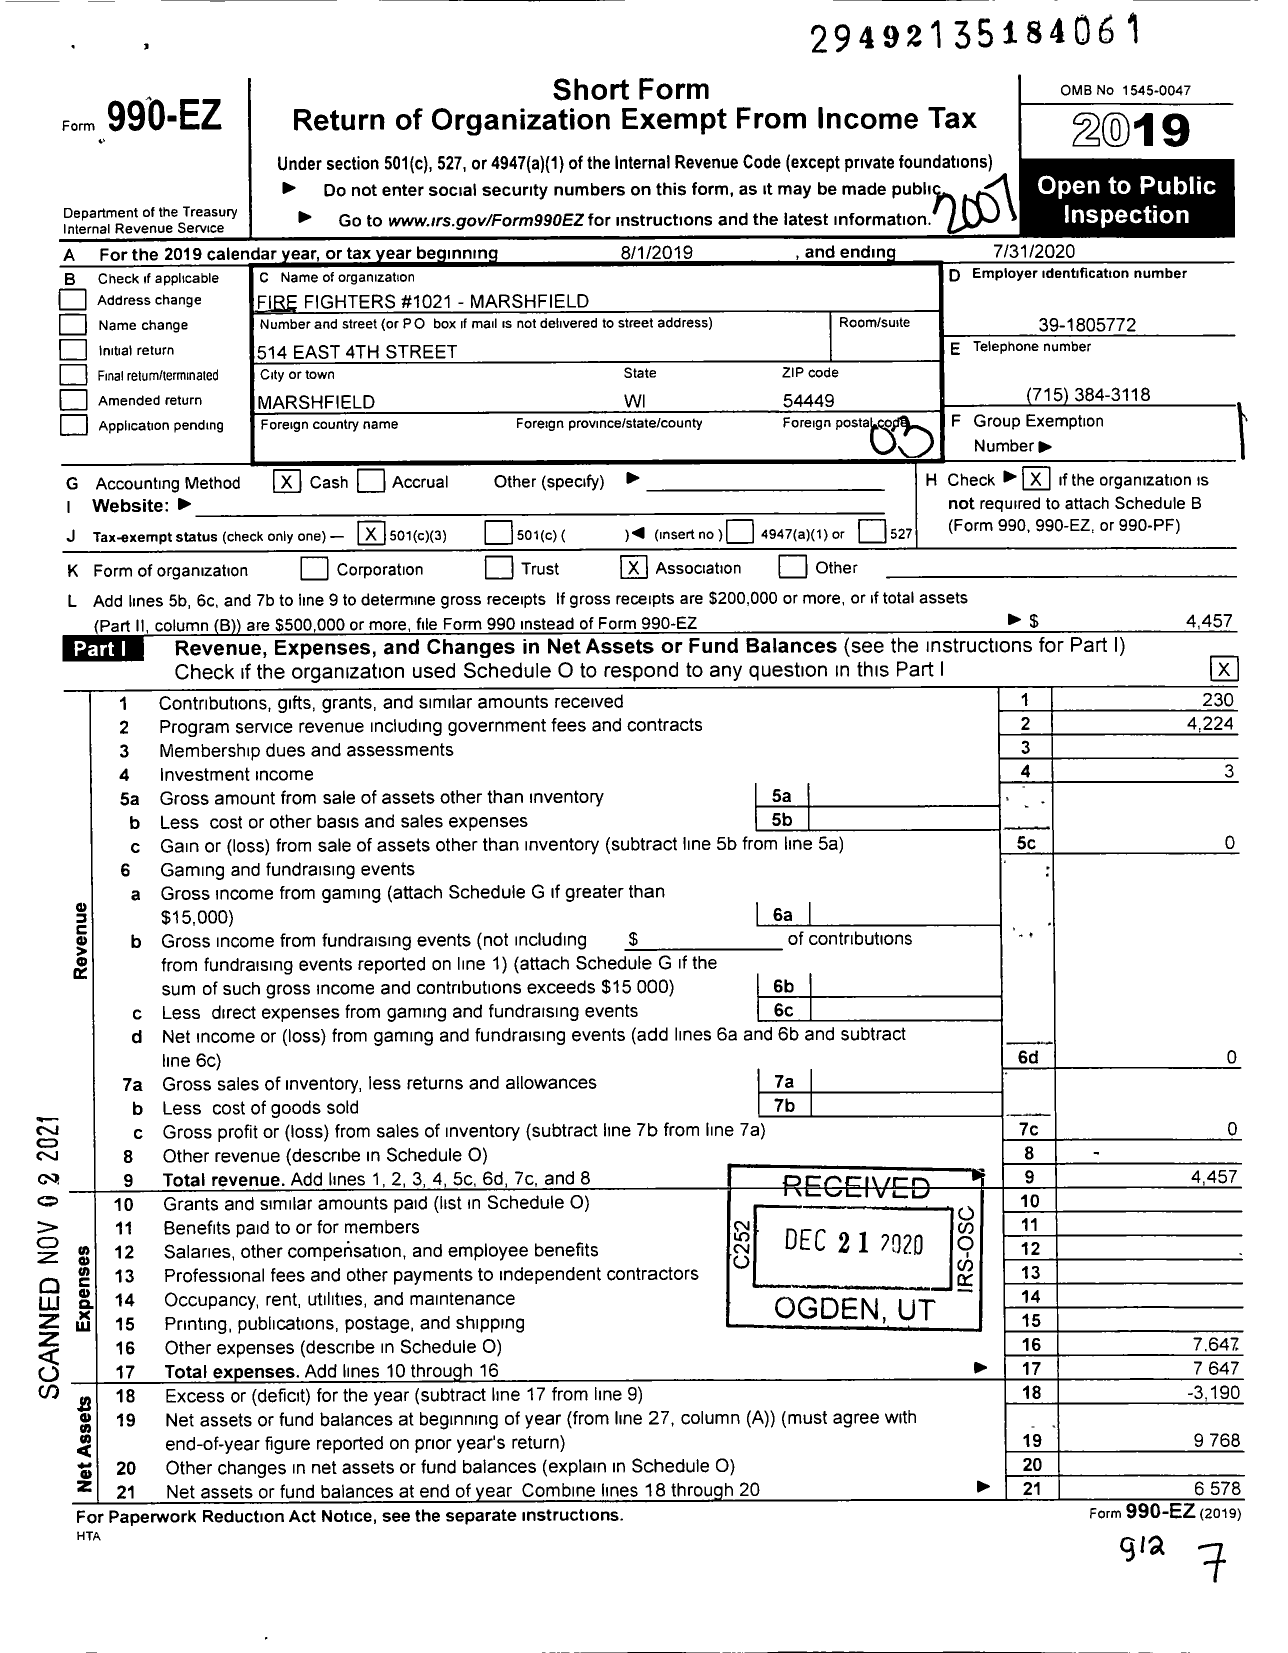 Image of first page of 2019 Form 990EZ for Fire Fighters 1021 - 1021-marshfield